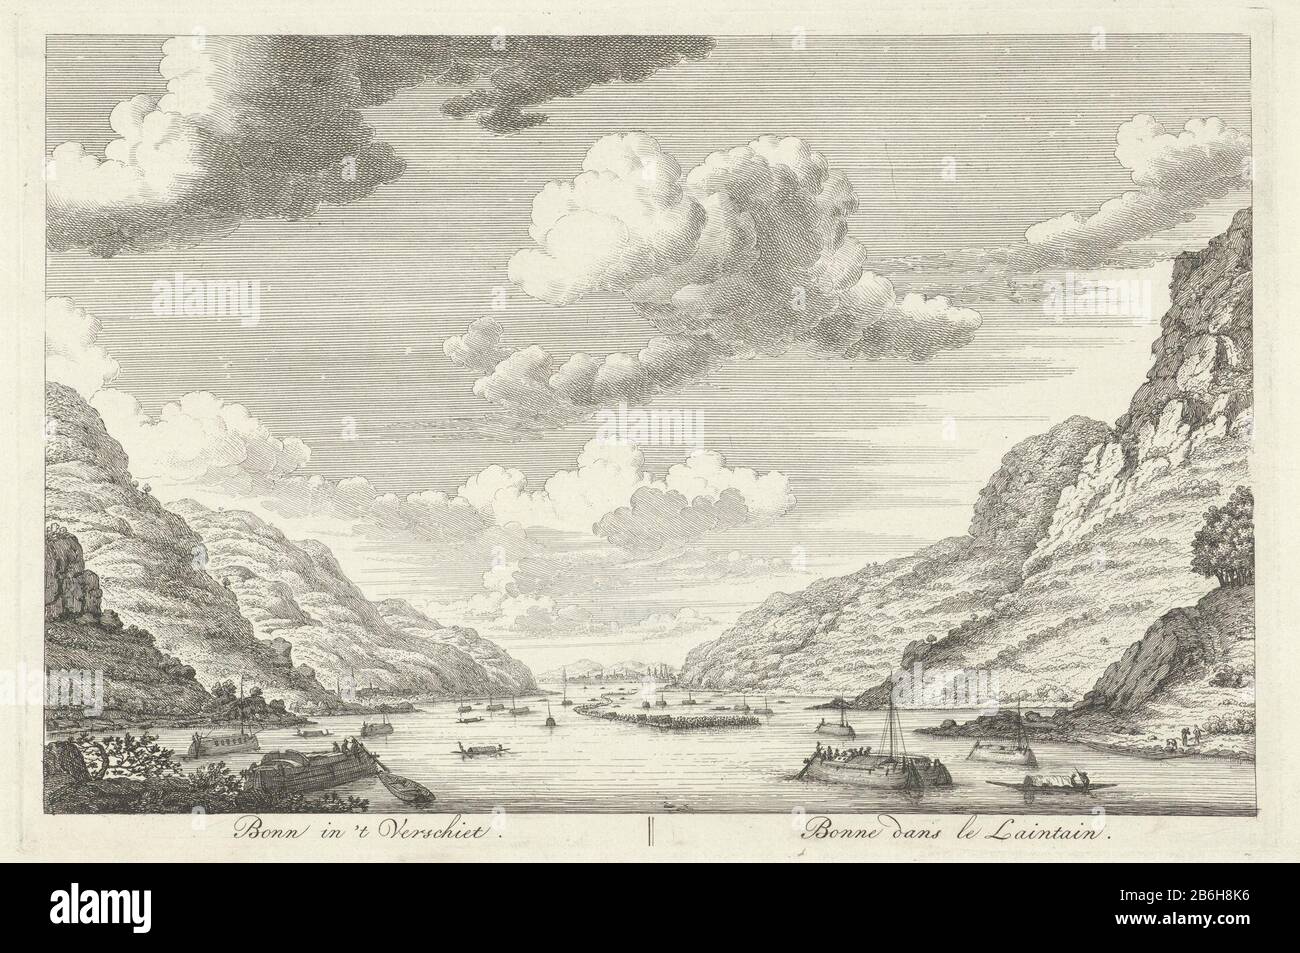 Contours of Bonn, seen from the Rhine in Bonn 't Verschiet Bonne dans le Laintain (title object) Sights along the Rhyn (series title) view of the contours of the German city of Bonn, seen from the Rhine. The print is a part of a elfdelige series of prints with faces along the Rijn. Manufacturer : print maker: Henry the Lethnaar drawing: Cornelis Ploos van Amstel Publisher: Frederik Willem GreebePlaats manufacture: Amsterdam Date: 1767 Physical characteristics: etching material: paper Technique: etching dimensions: plate edge: h 230 mm × W 343 mm Subject: river ships (in general) prospect of ci Stock Photo